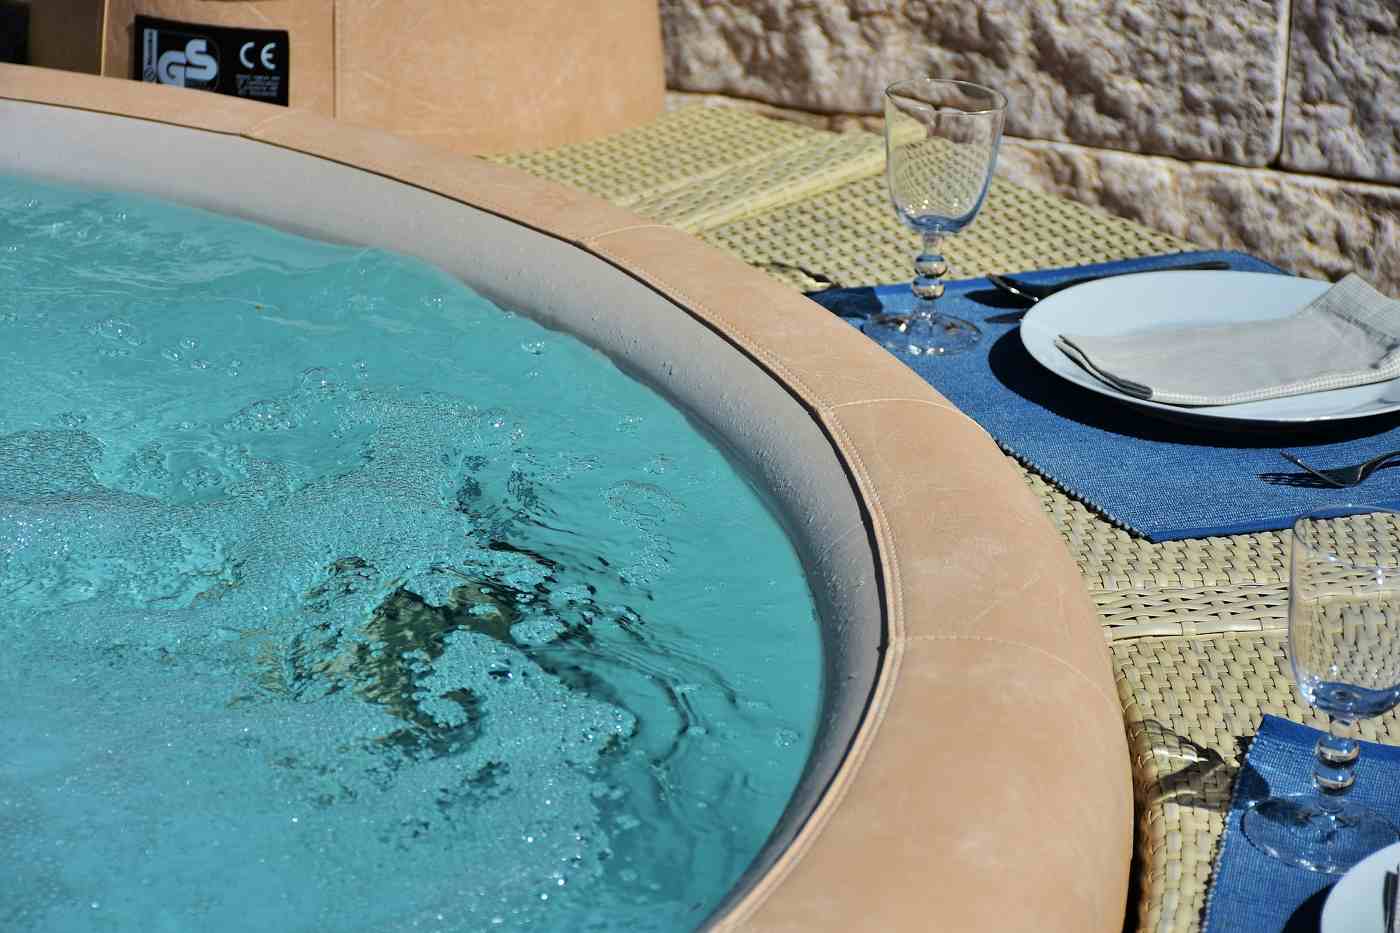 Whrilpool in the outdoor area enjoy modern spa facilities with splash water throughout the year